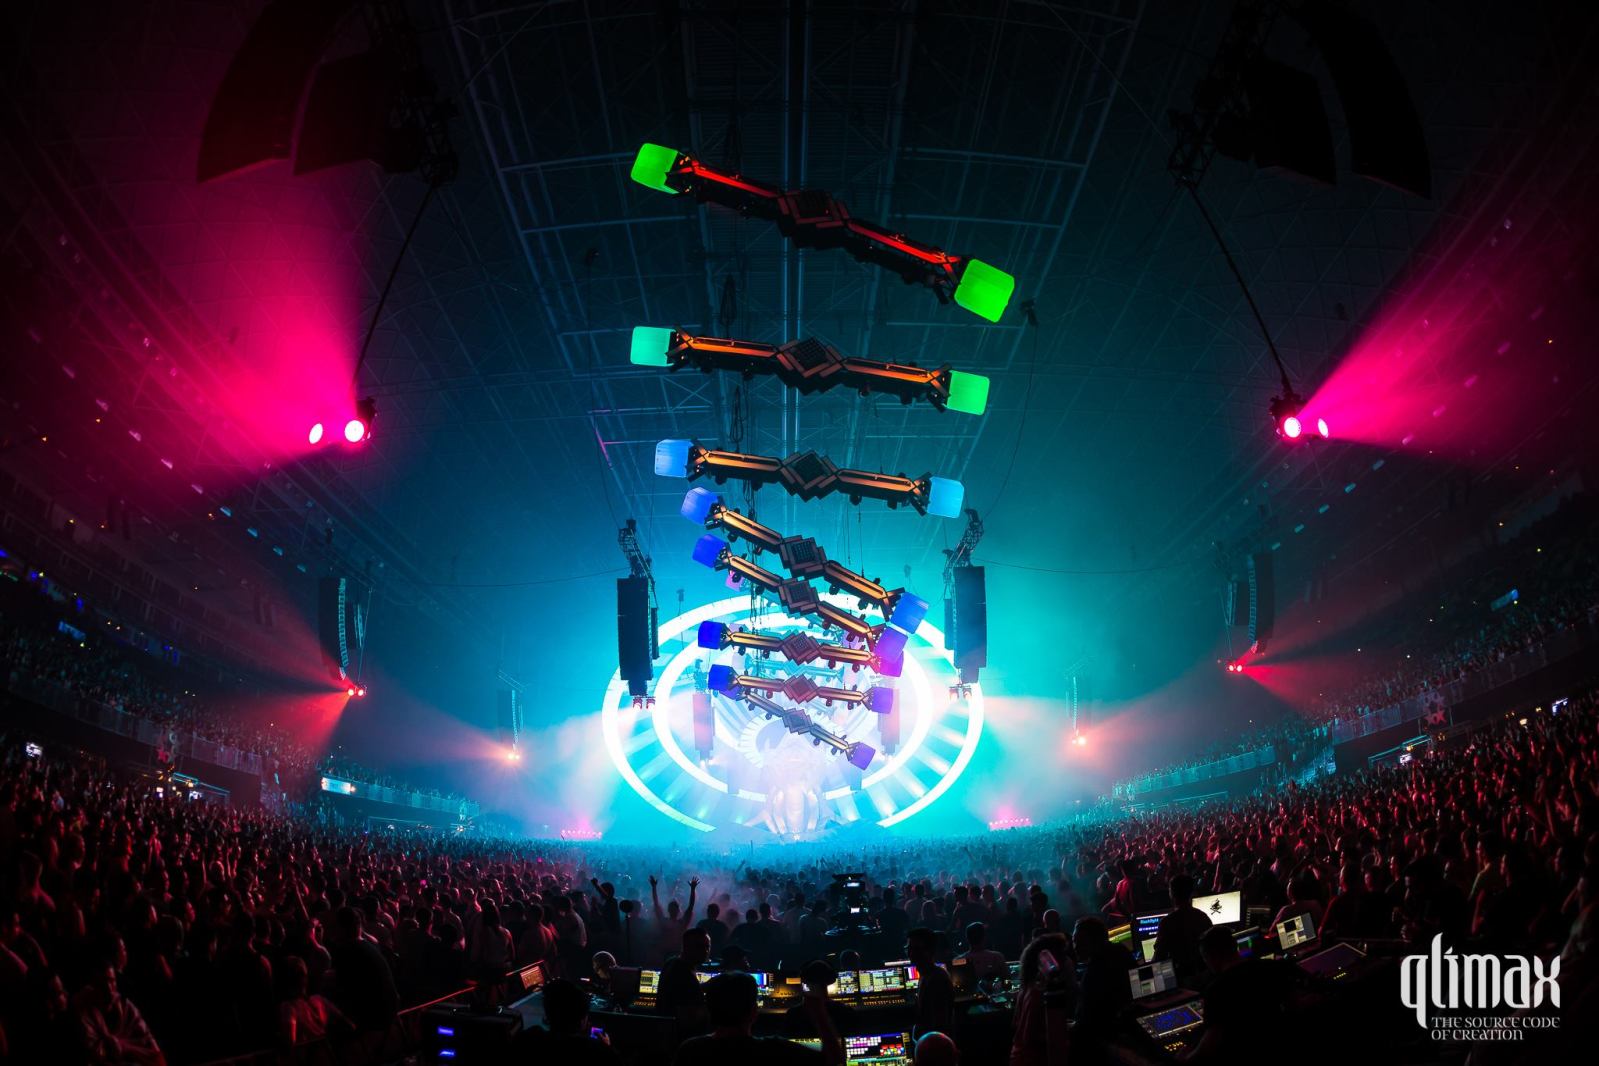  Qlimax 2014 Source Code of Creation Video resimler